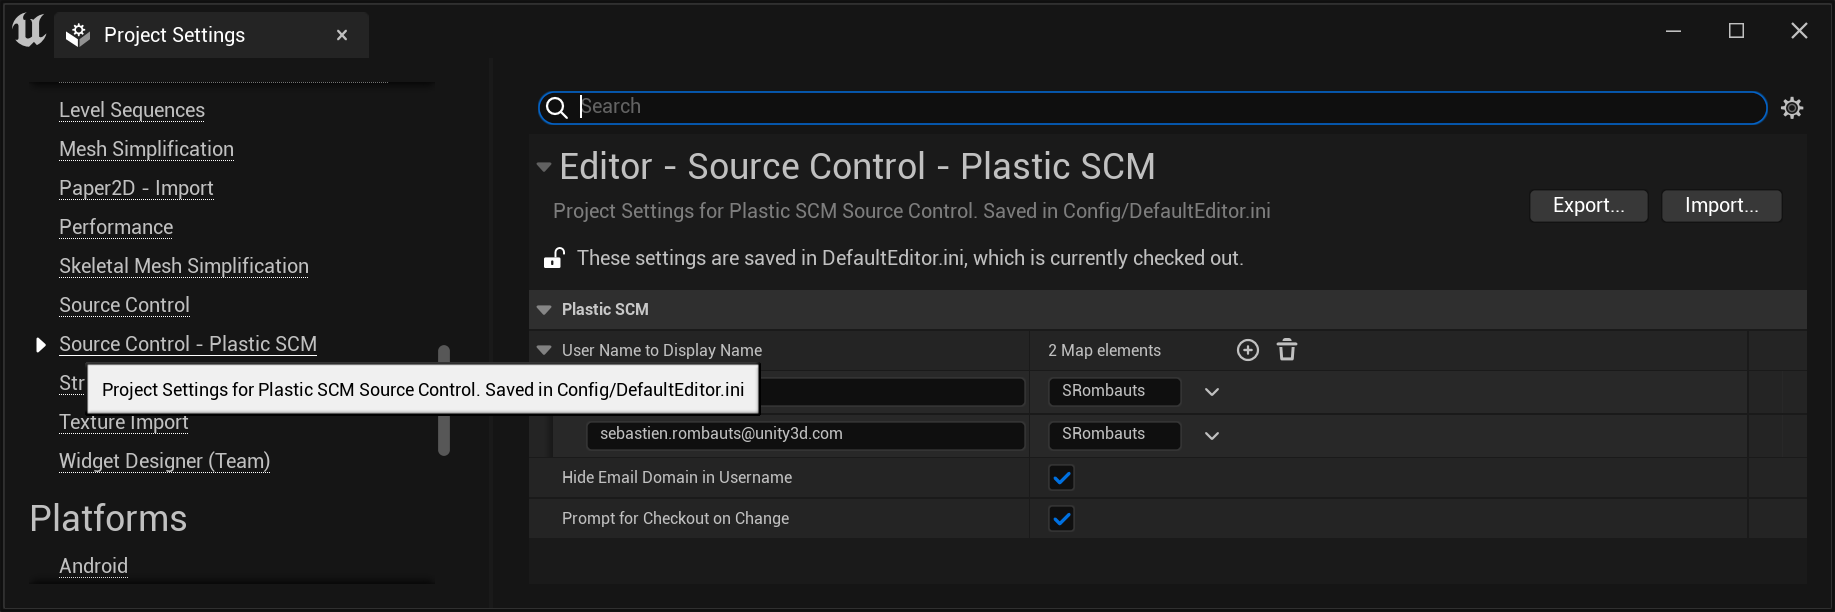 Project Settings - Source Control - Unity Version Control